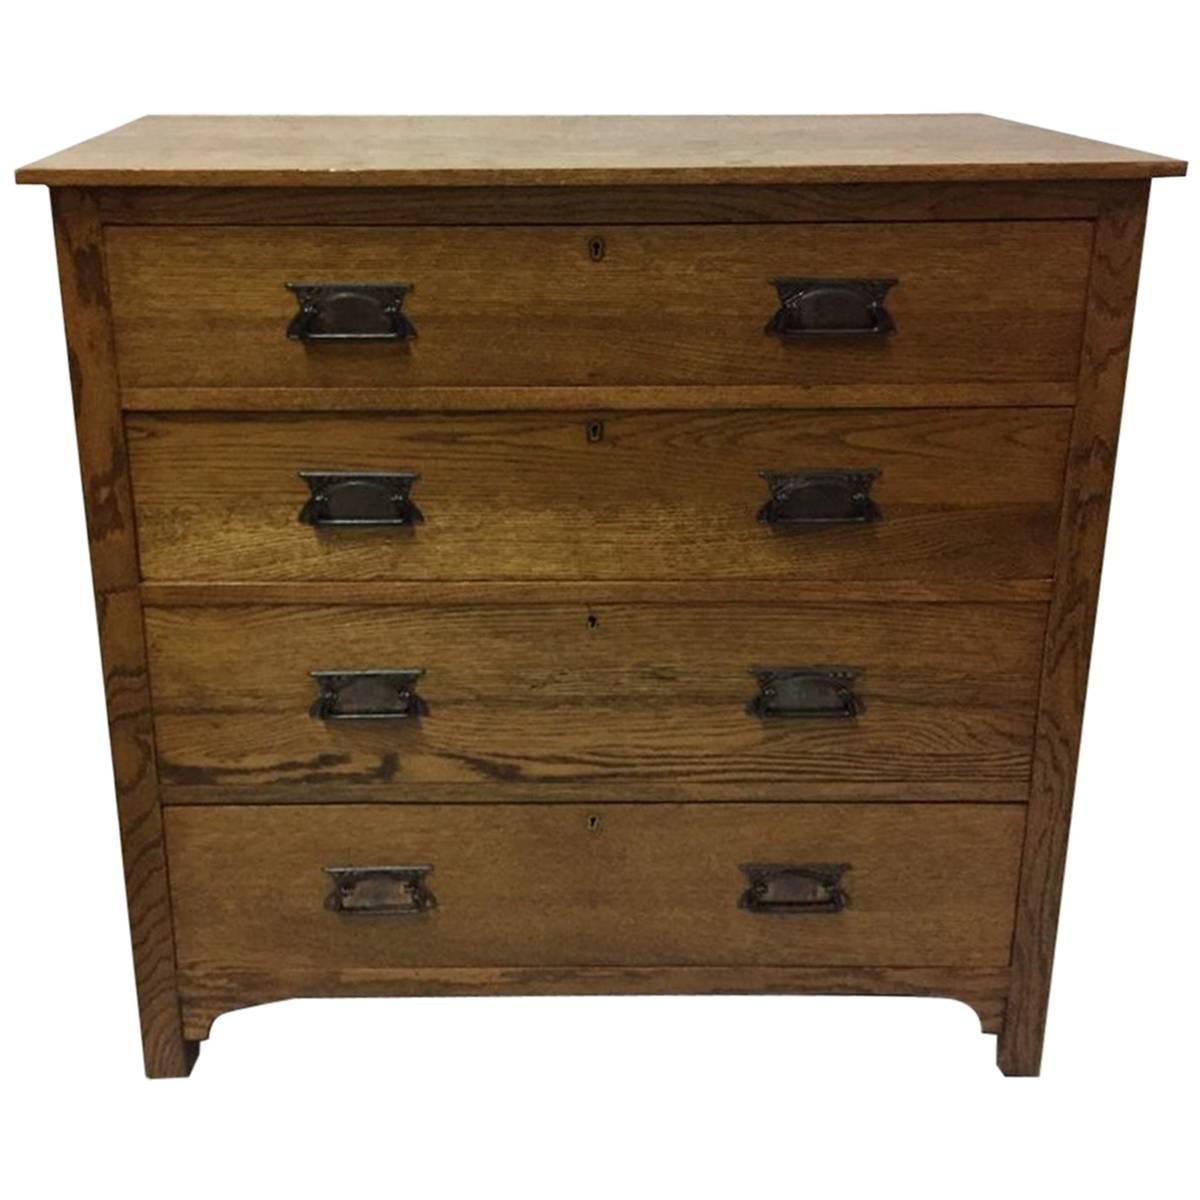 Harris Lebus Arts and Crafts Oak Chest of Drawers with Floral Detailed Handles